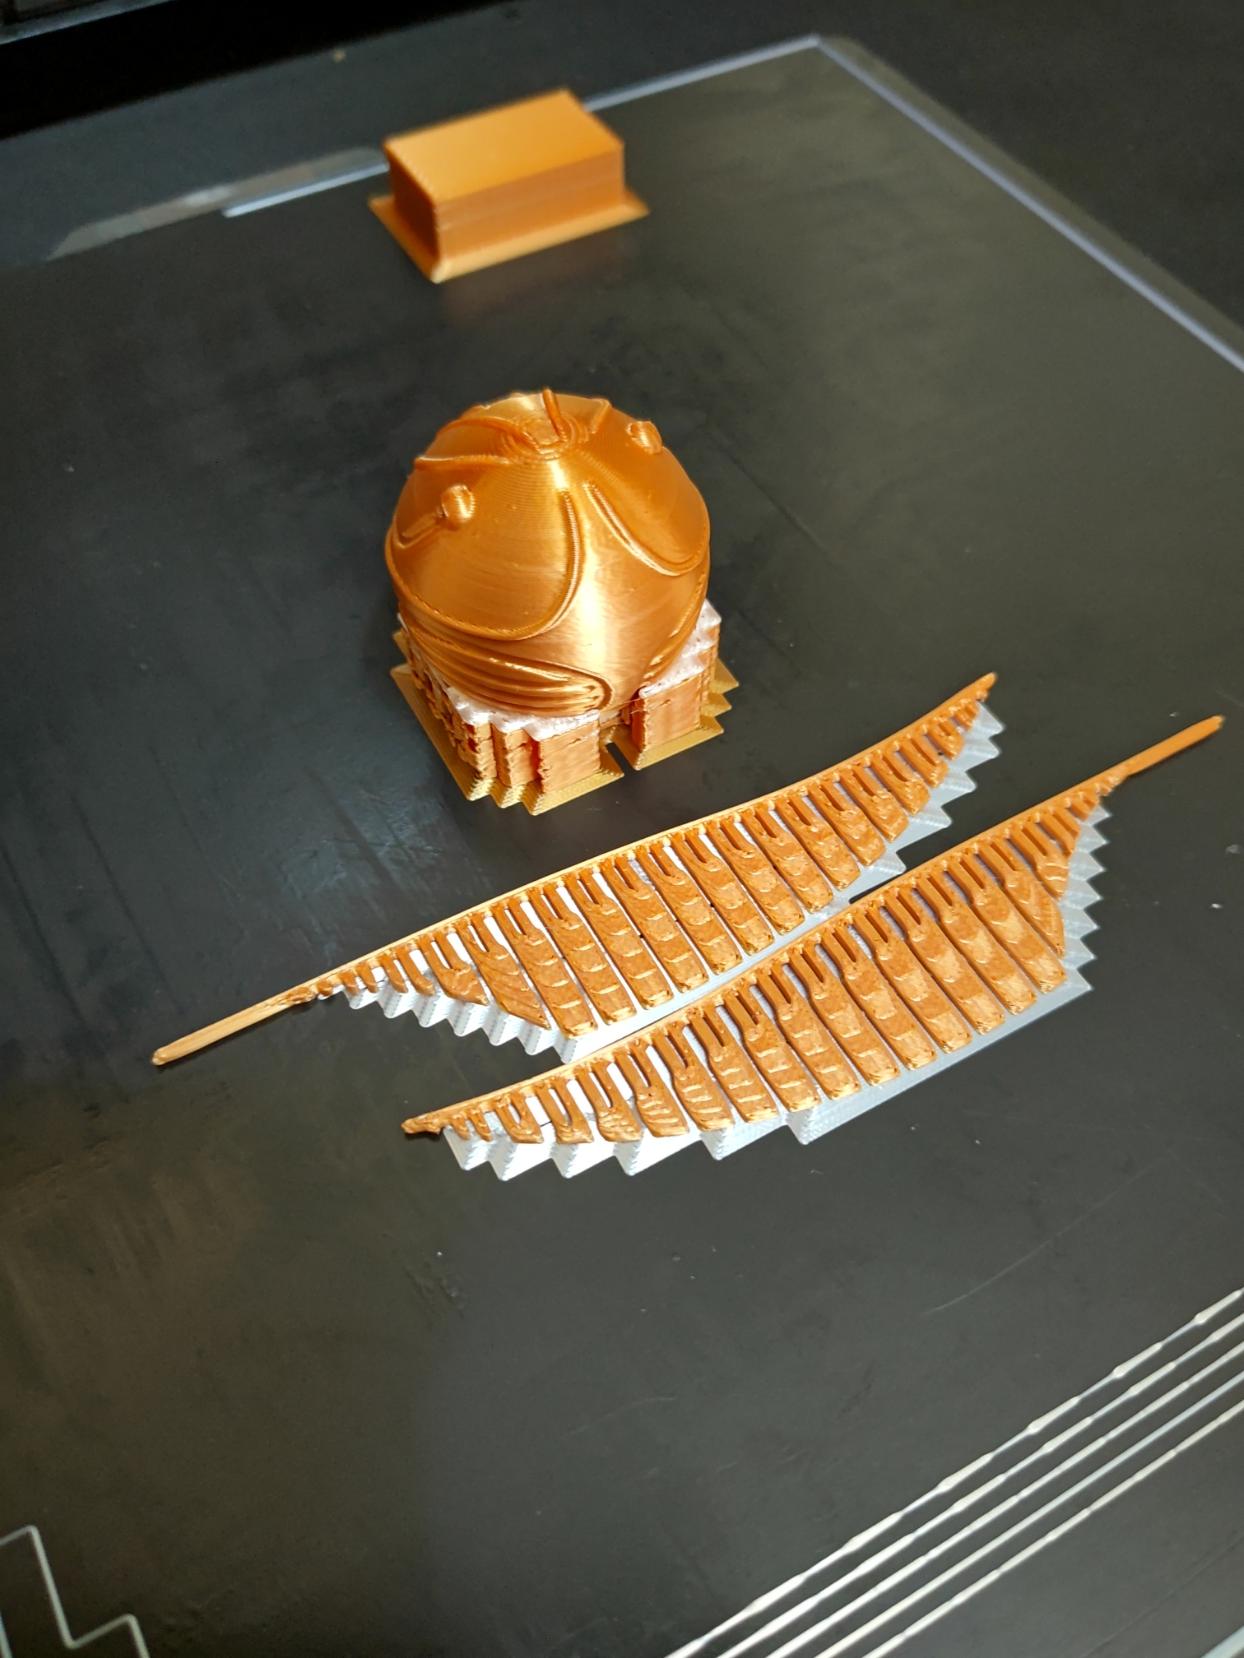 Golden Snitch  - Thanks for the model, loved the electroplating video!  Had to make my own, used the bambu lab interface material as the support which worked really well and allowed me to print the wings flat.  Painted it later in gold and silver :-) - 3d model